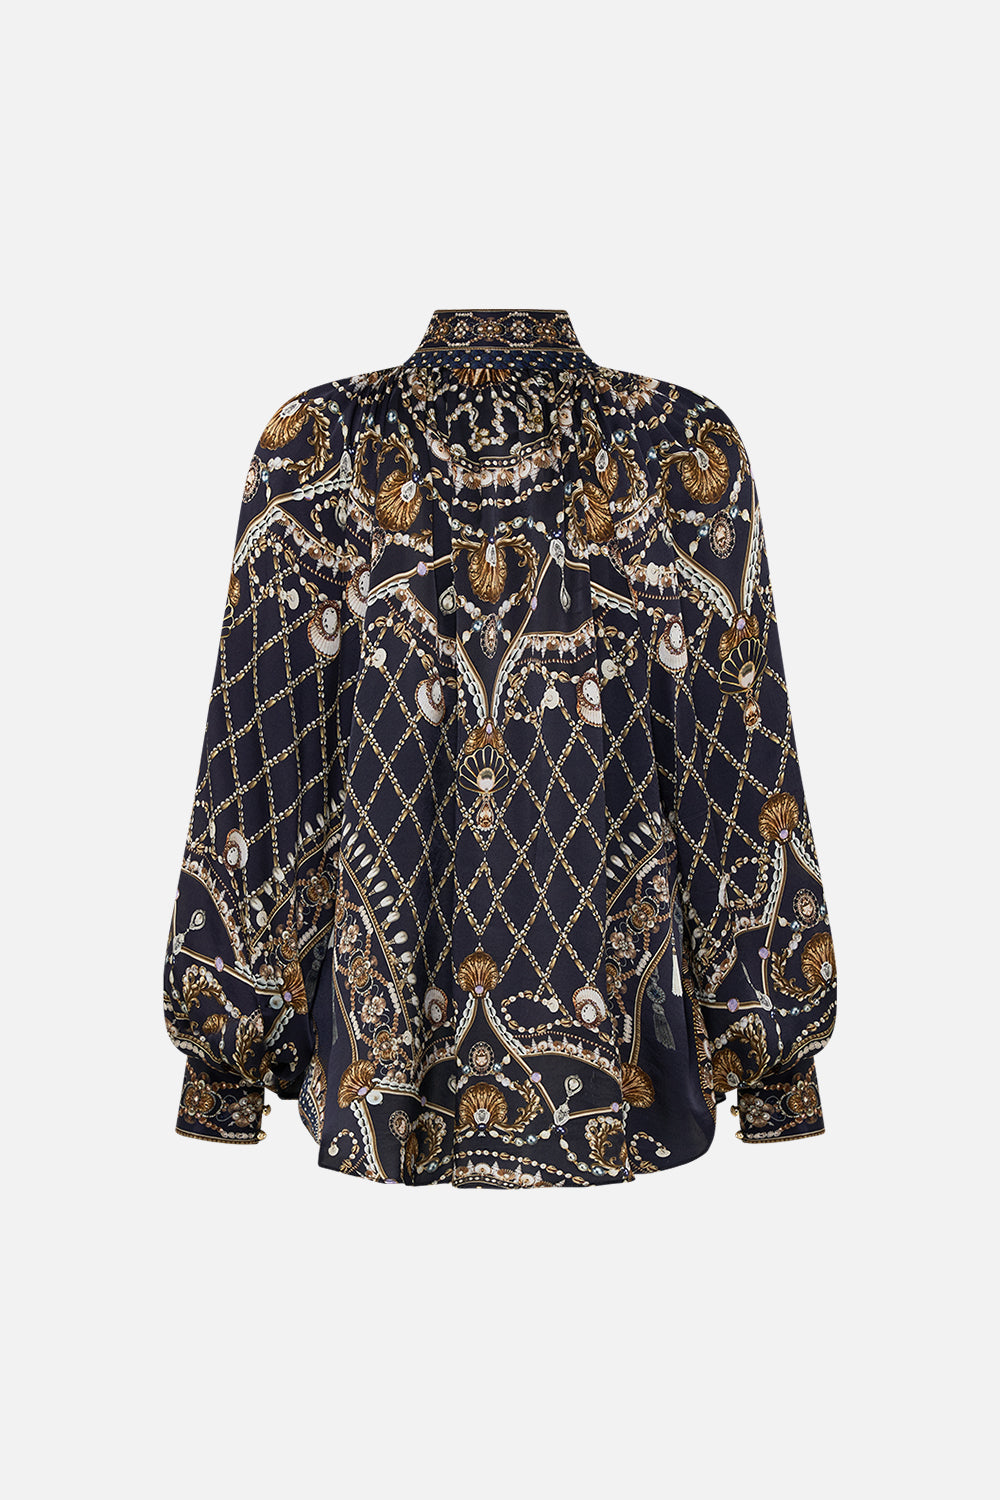 CAMILLA button up shirt in Shell Games print